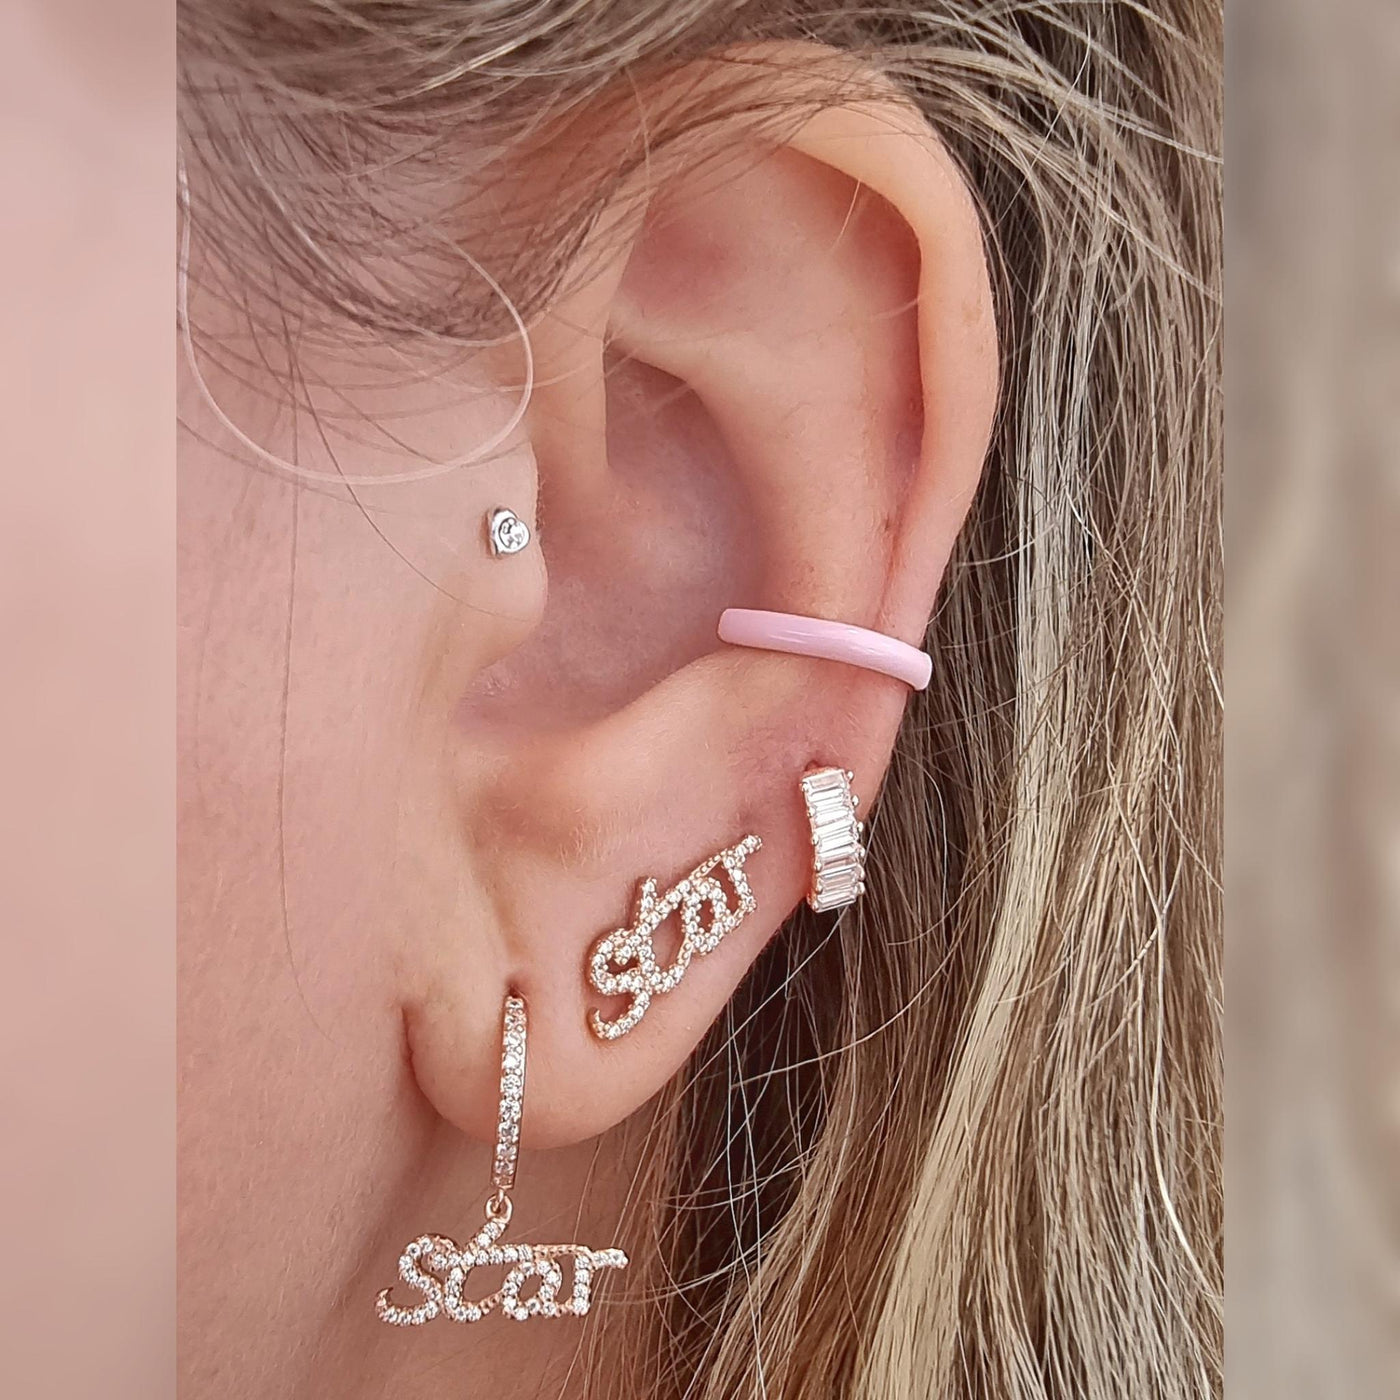 Silver earrings with star charm